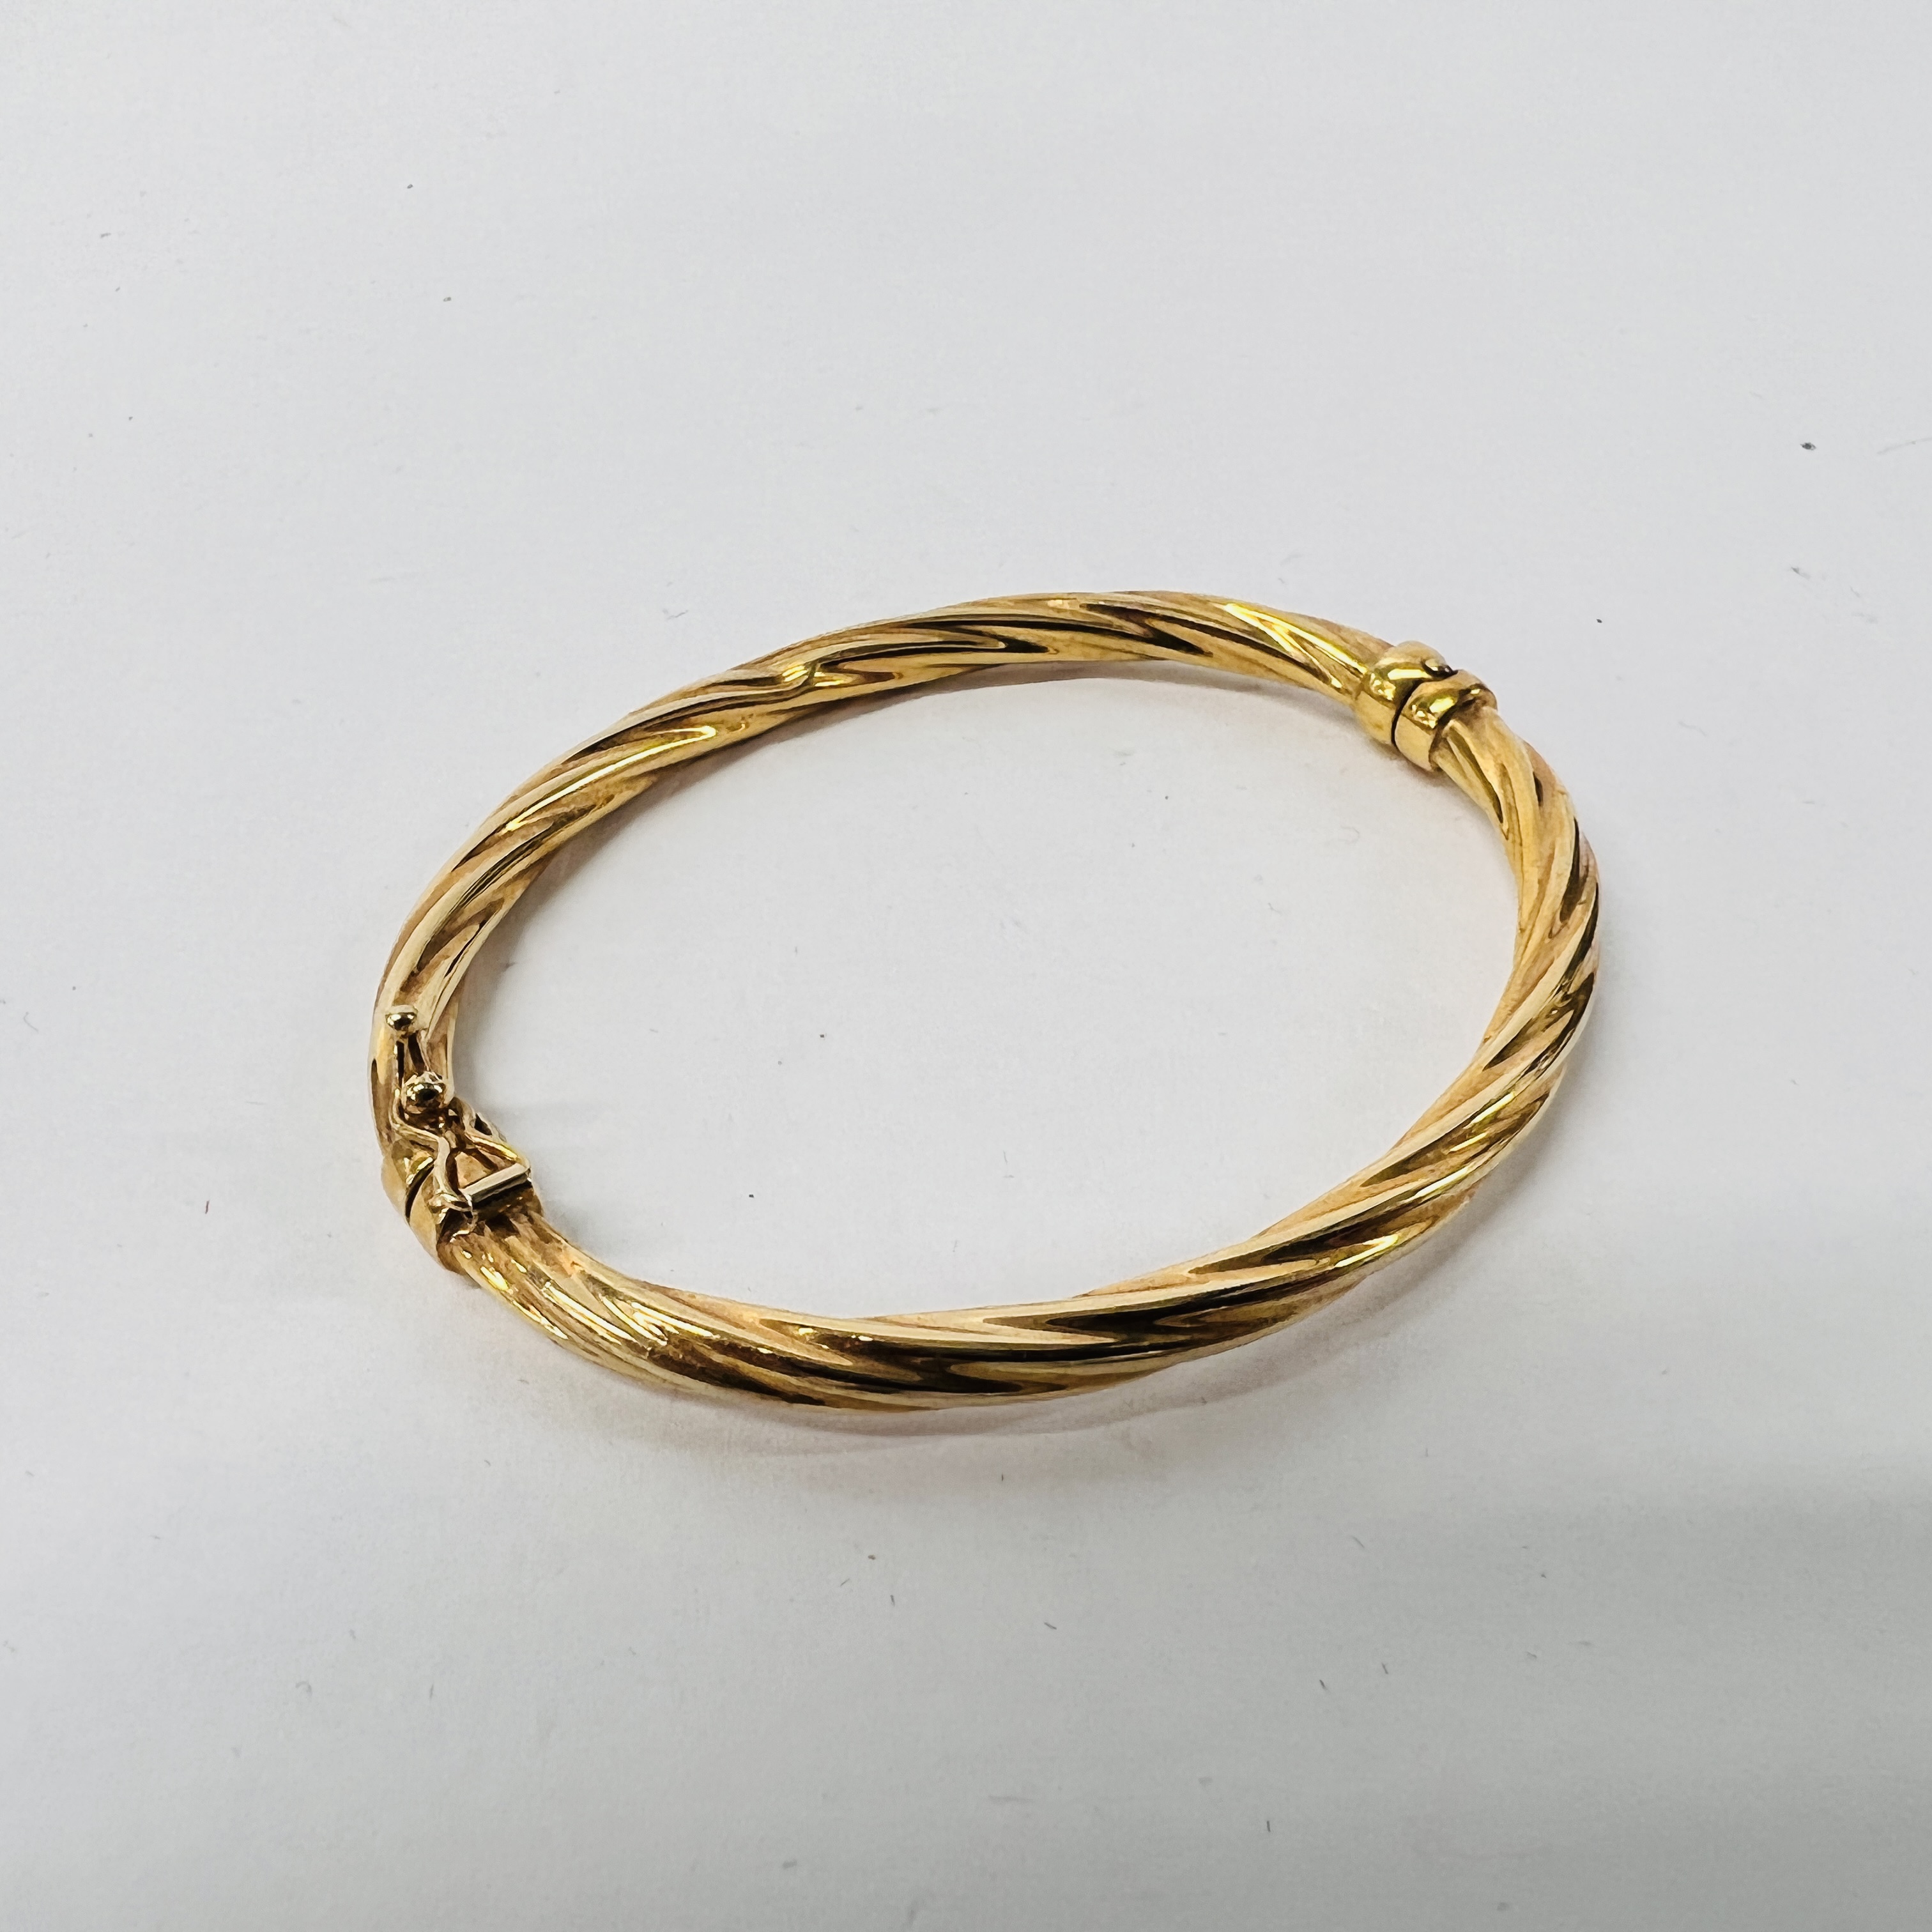 9CT GOLD BRACELET, WITH SAFETY CATCH. - Image 8 of 8